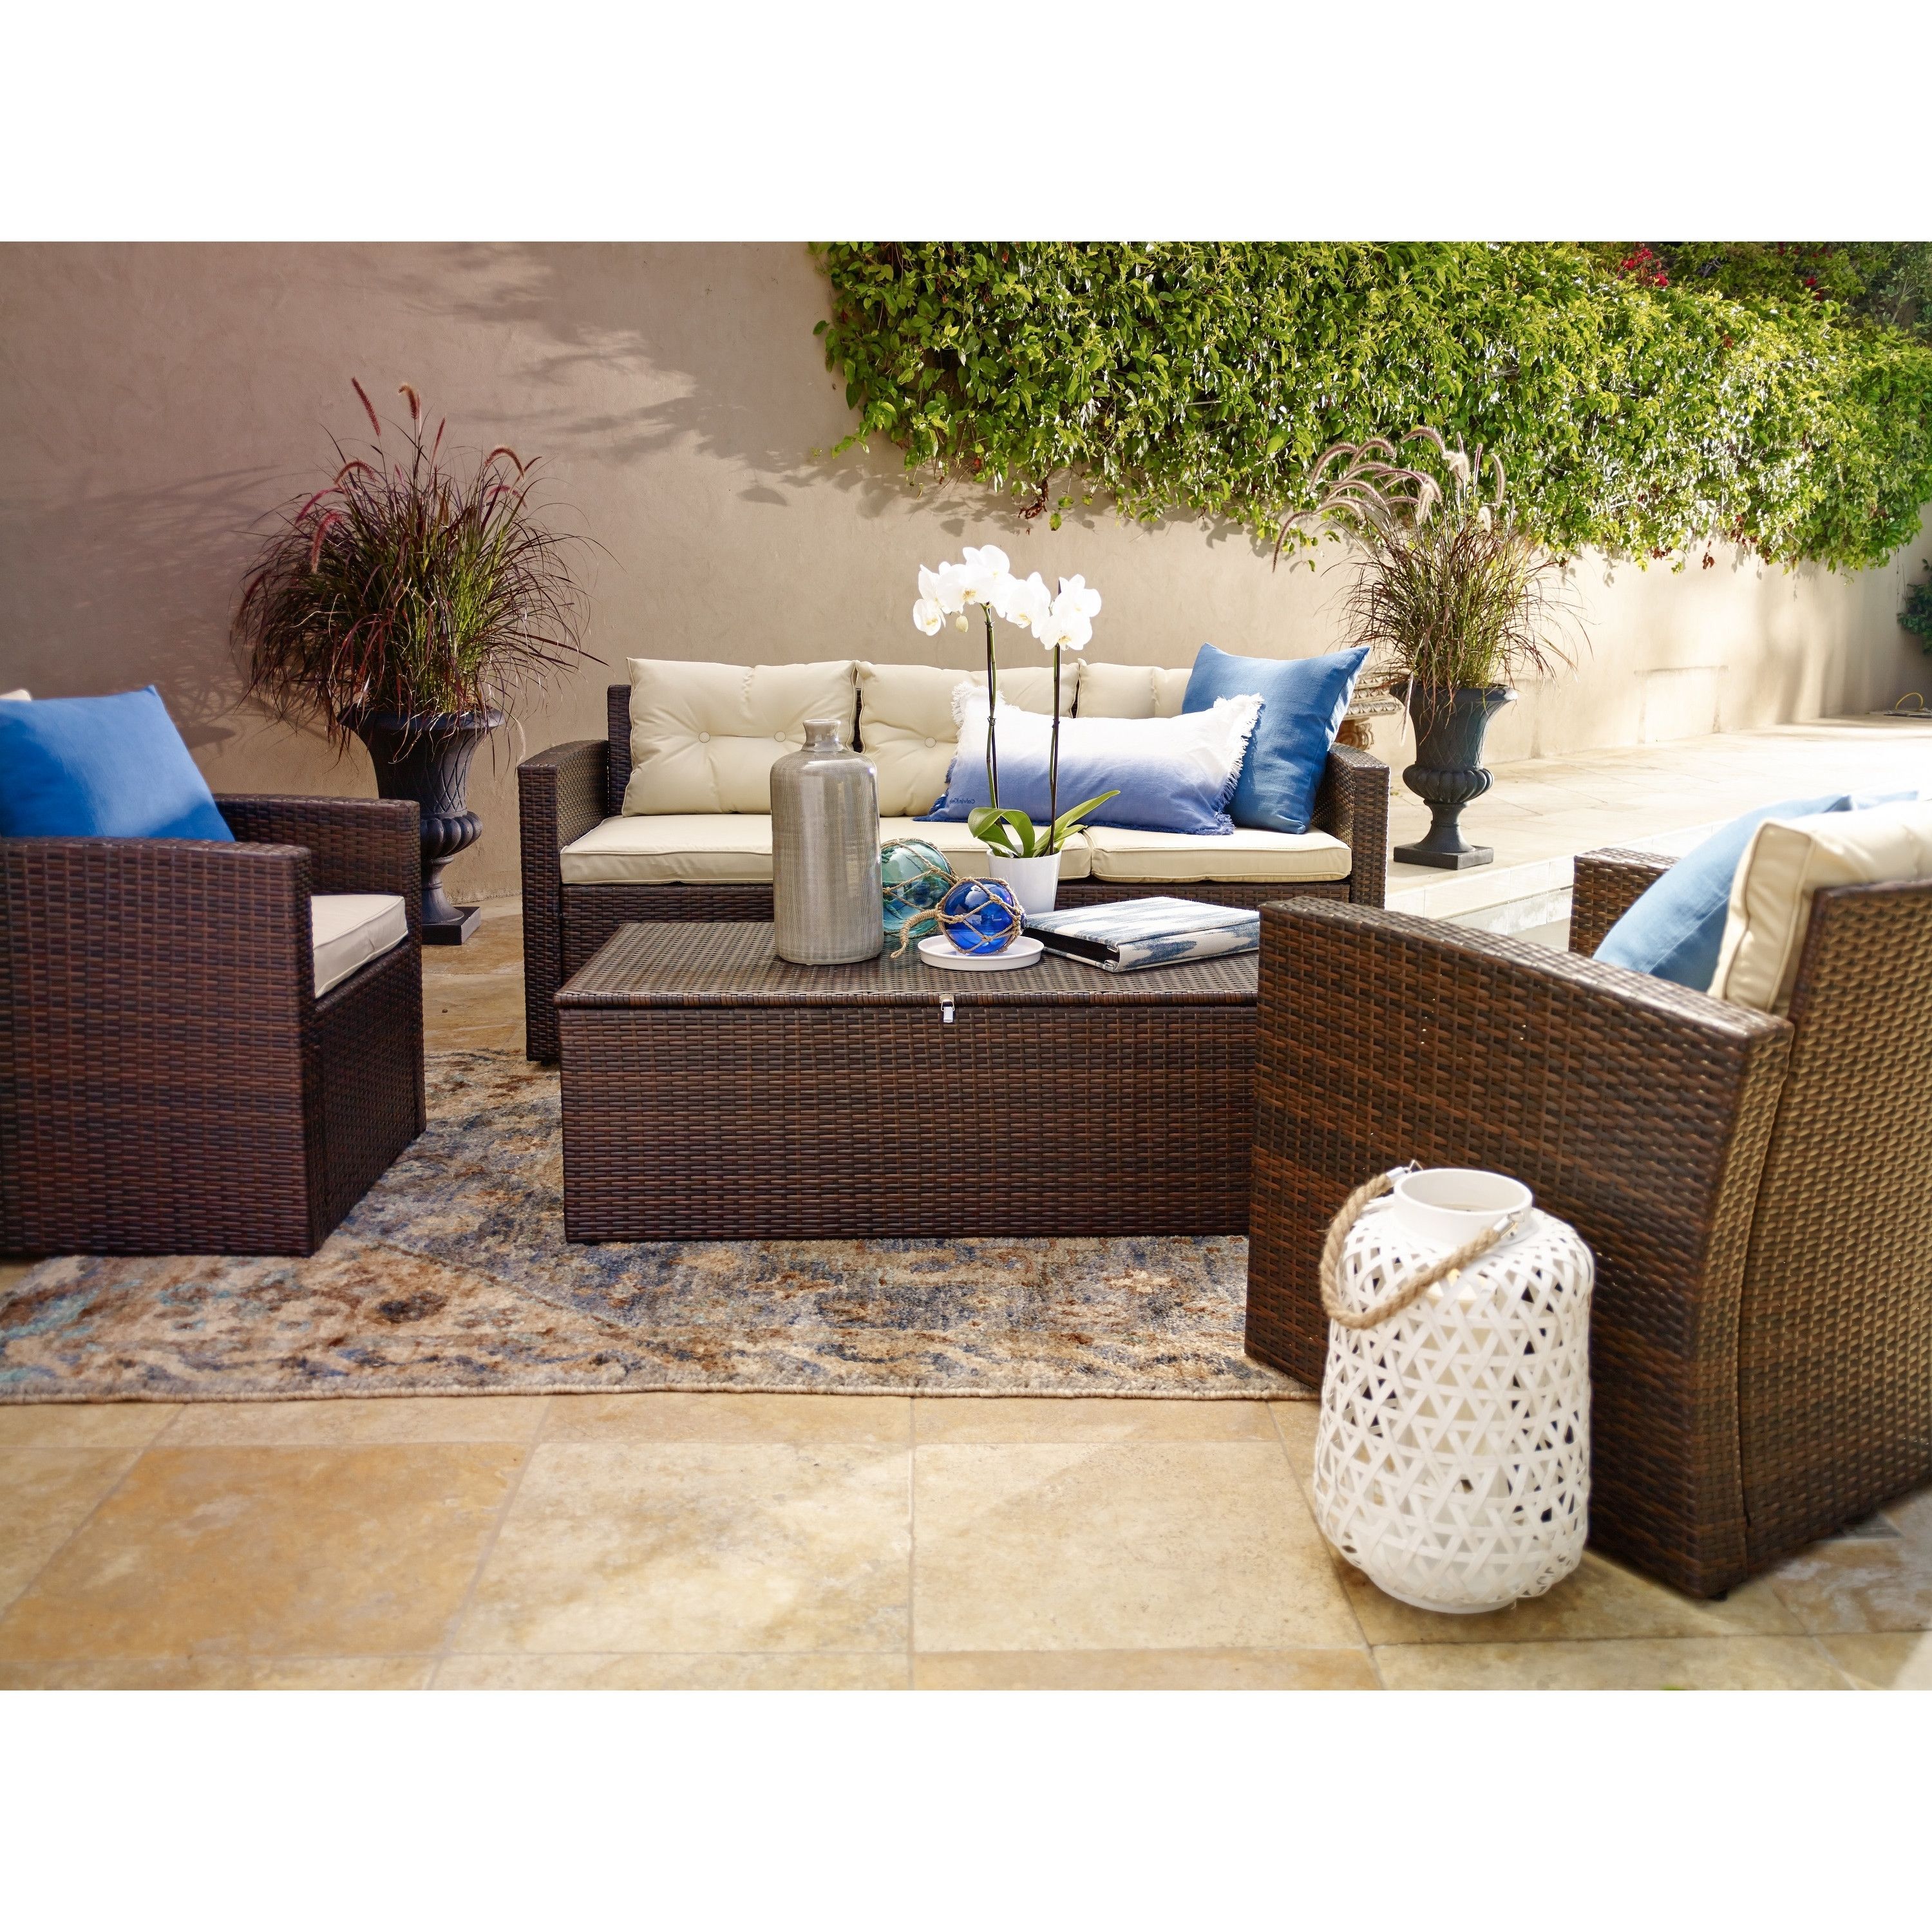 Amazing Of Patio Chair Set Patio Furniture Outdoor Dining And Throughout Preferred Wayfair Outdoor Patio Conversation Sets (View 1 of 20)